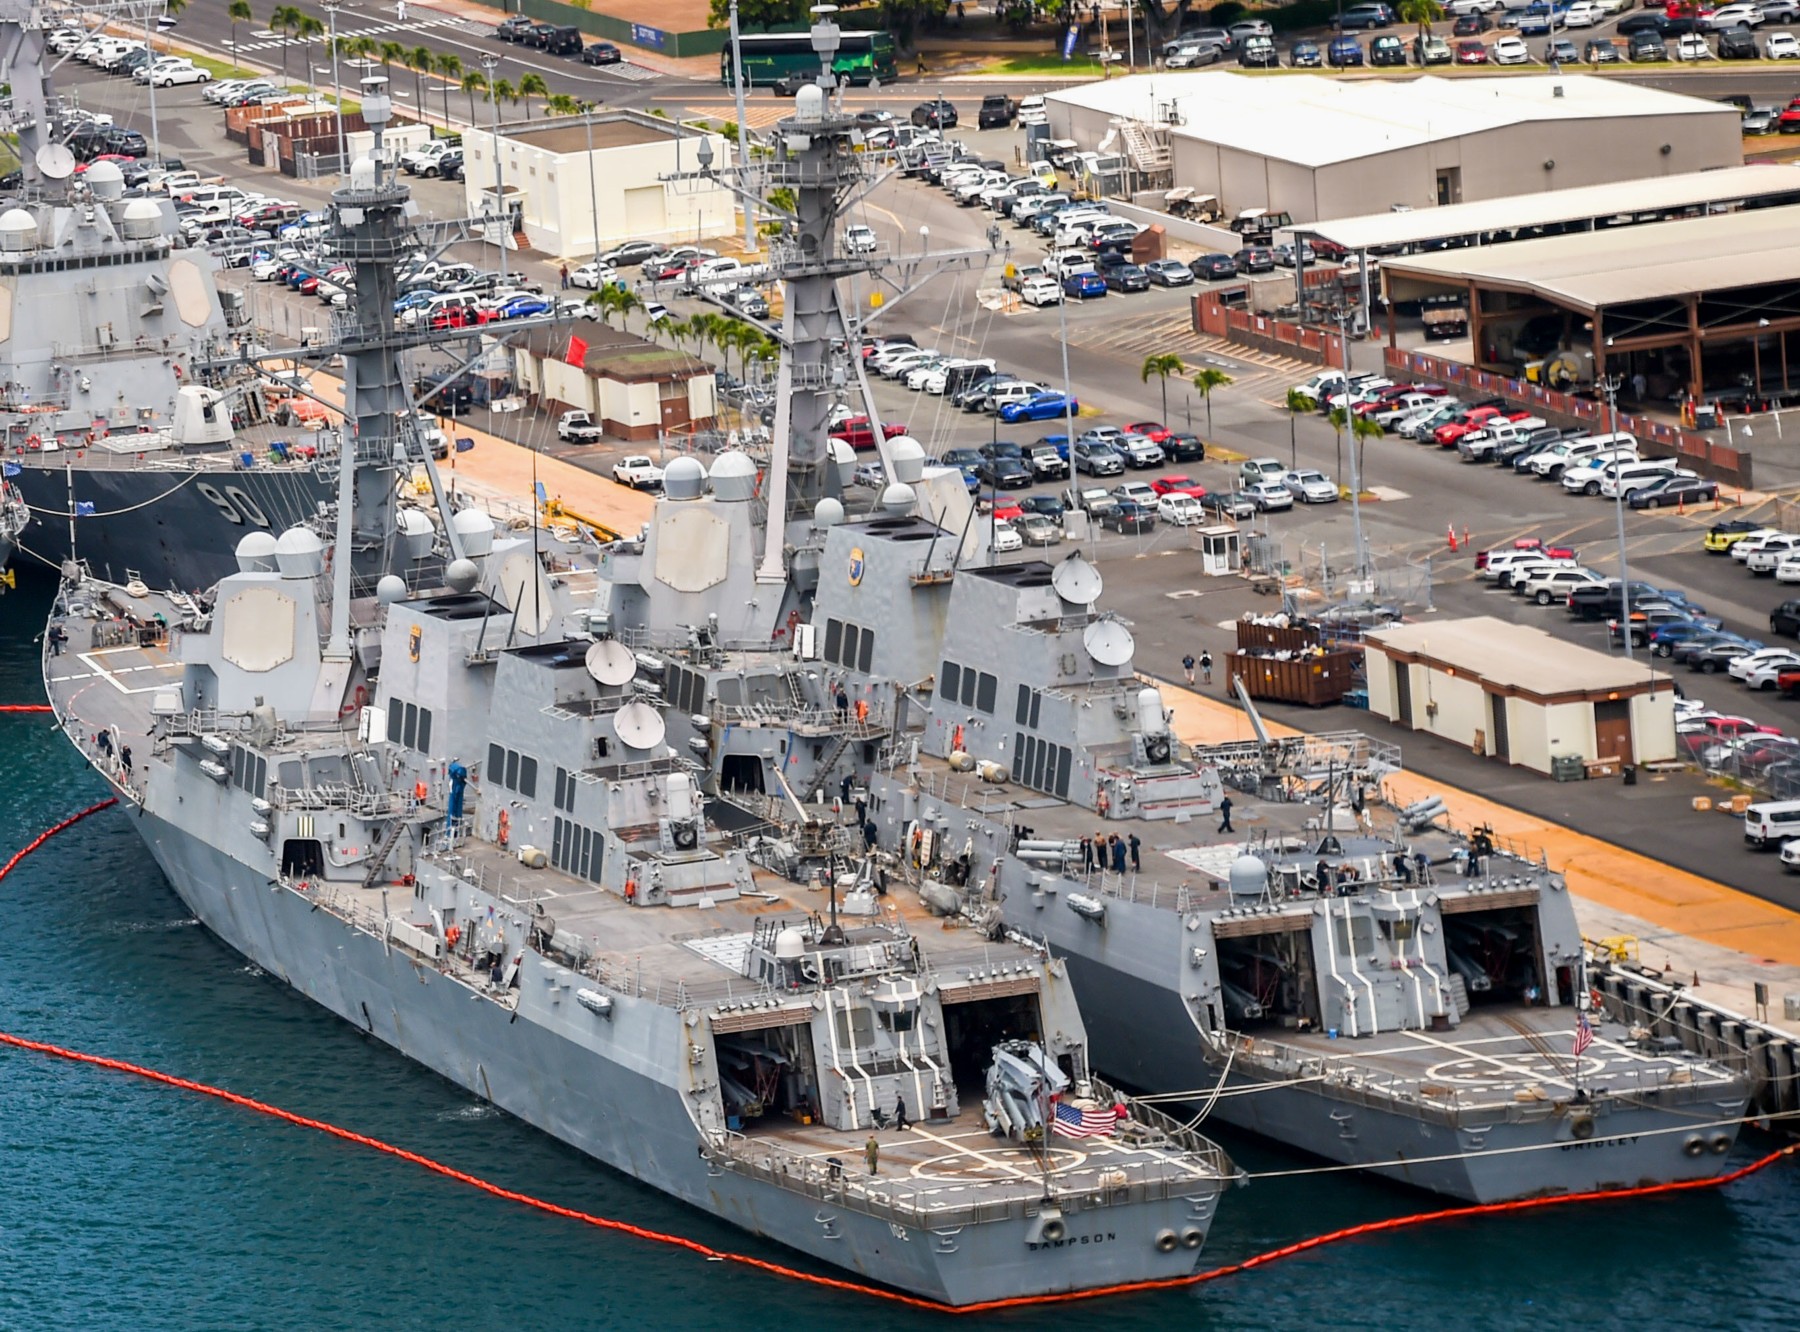 ddg-102 uss sampson arleigh burke class guided missile destroyer aegis us navy joint base pearl harbor hickam hawaii 99